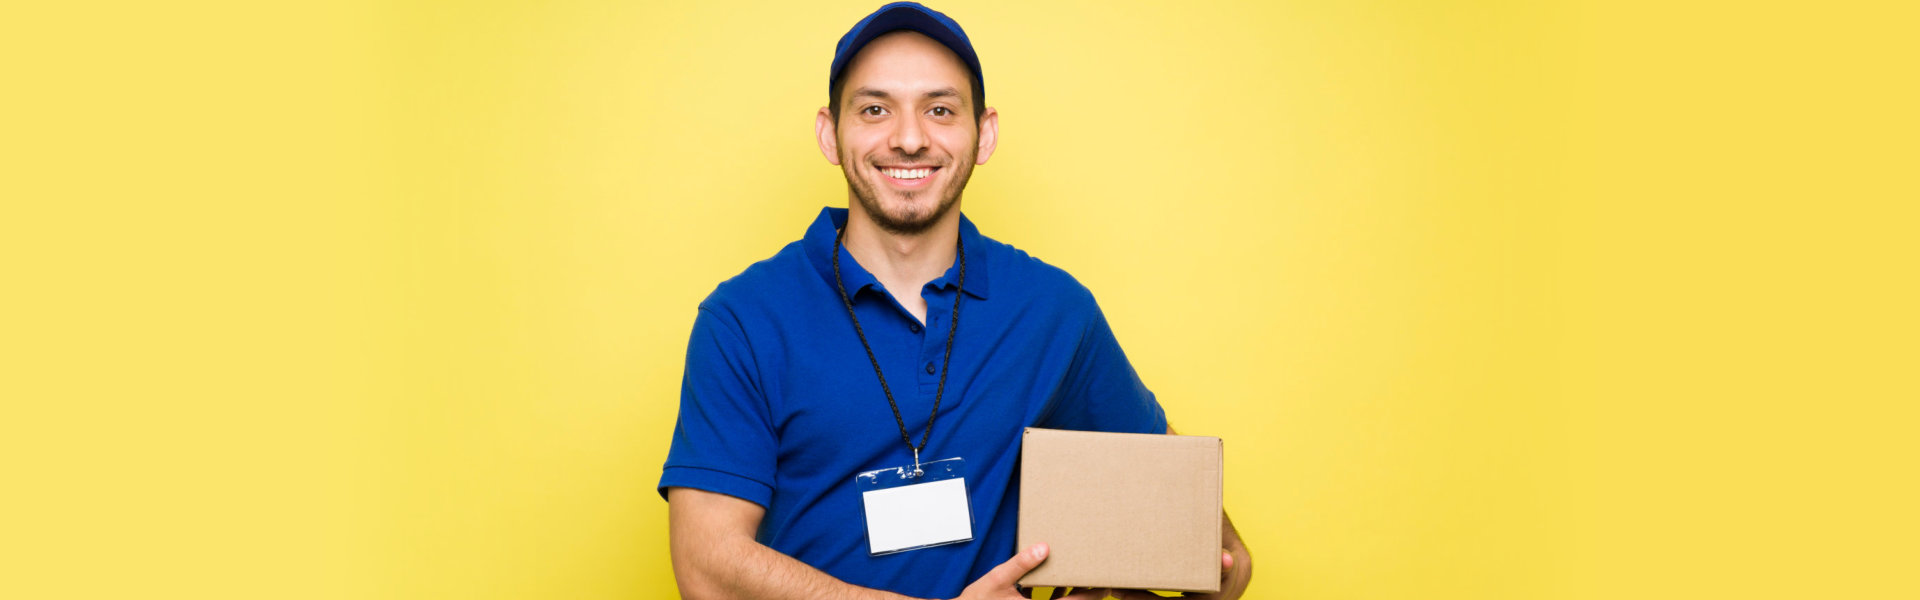 delivery man holding box